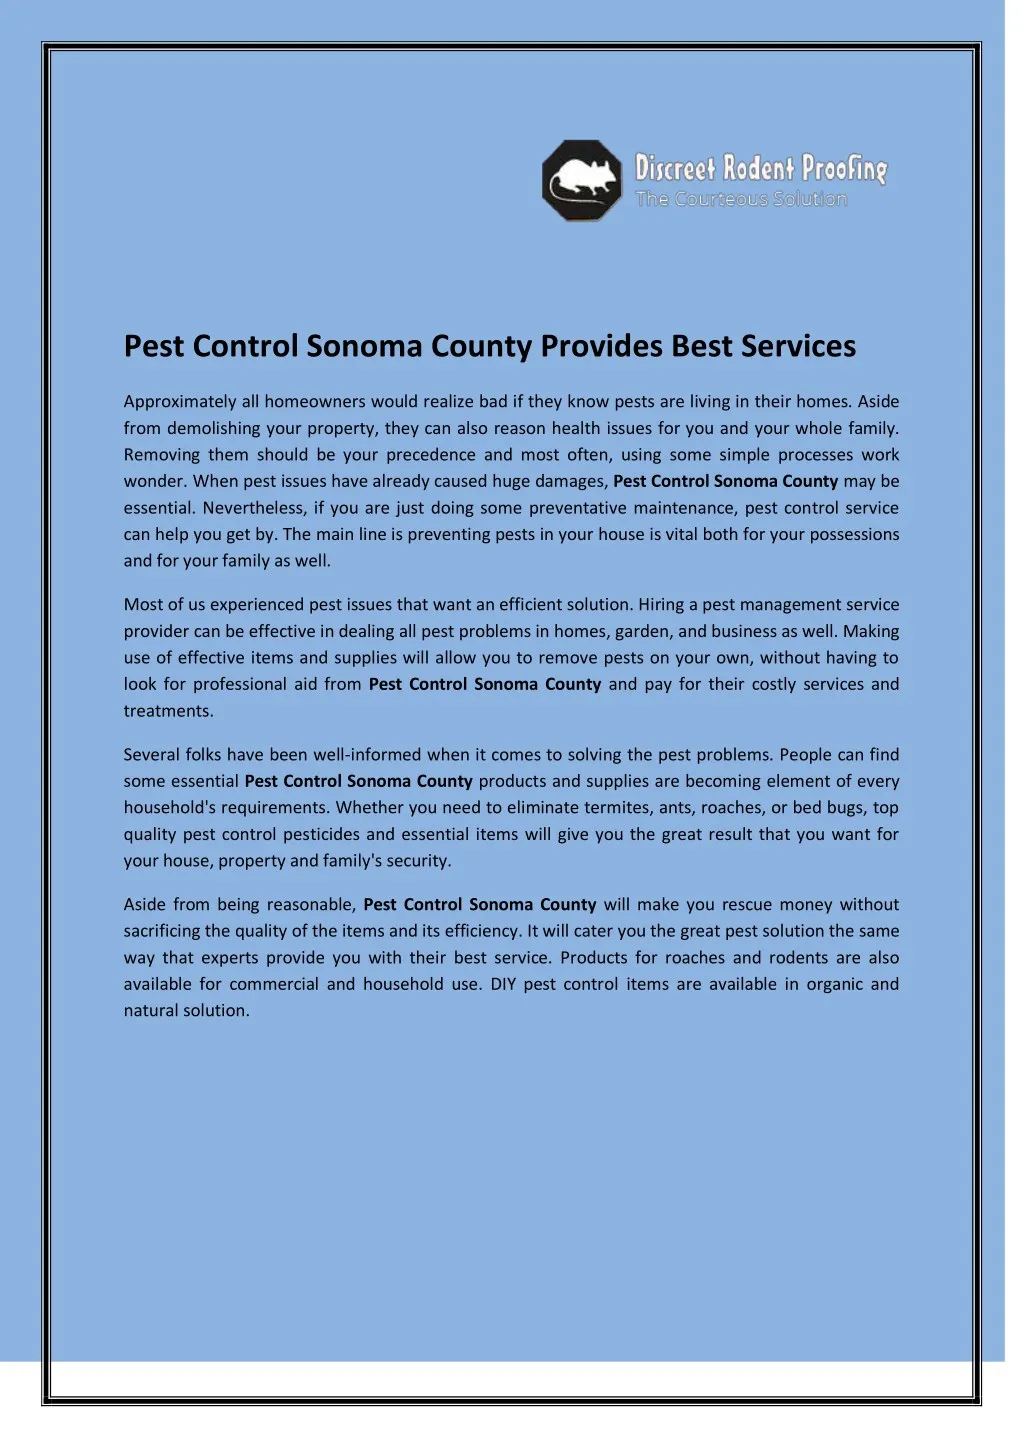 pest control sonoma county provides best services